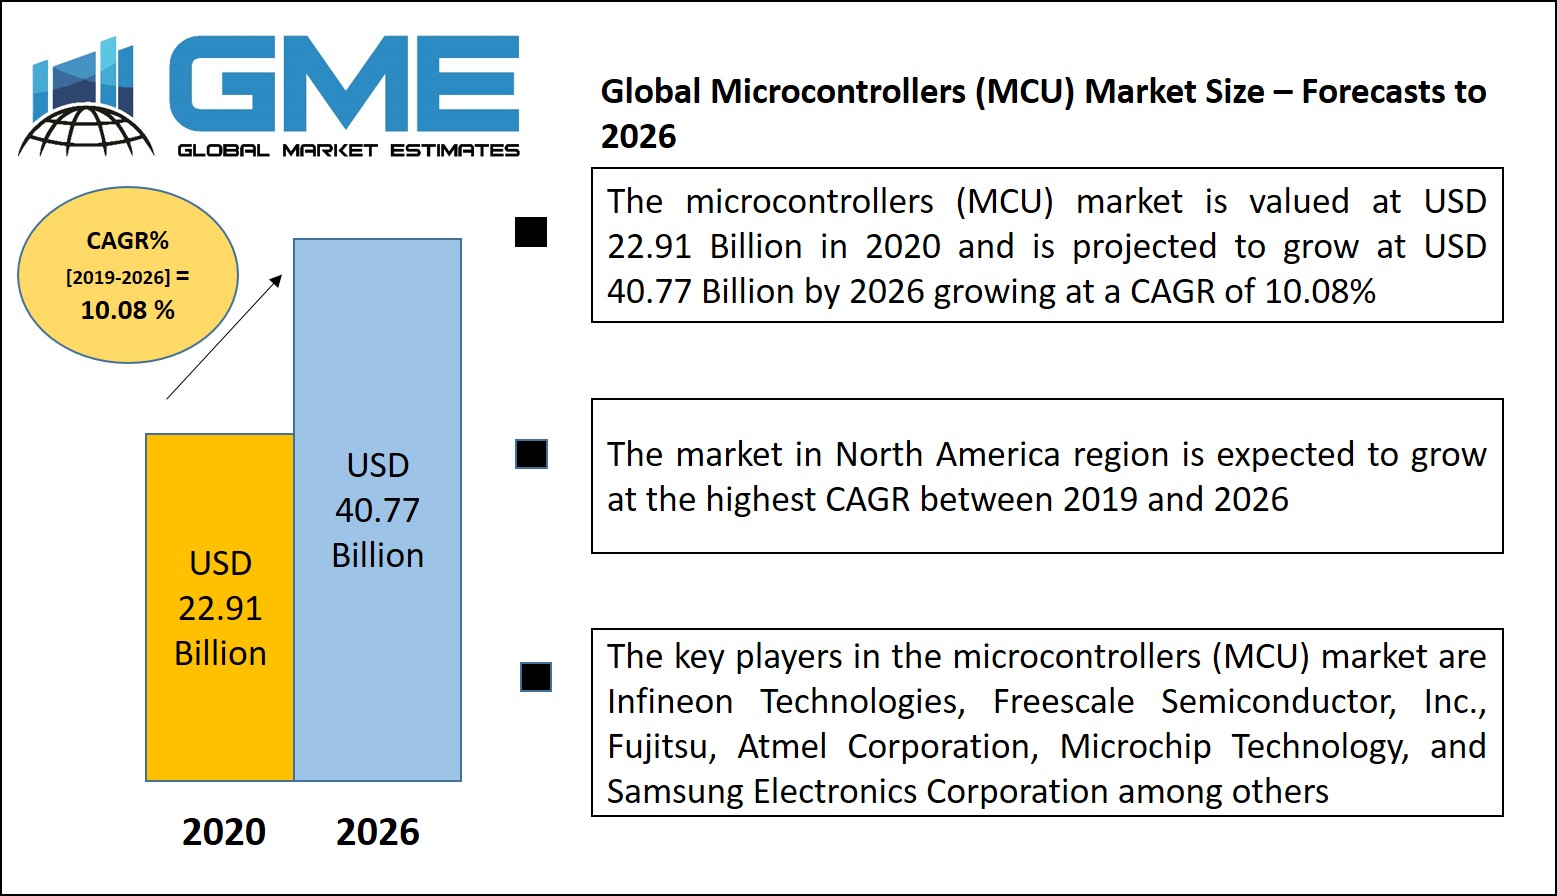 Global Microcontrollers (MCU) Market Size – Forecasts to 2026